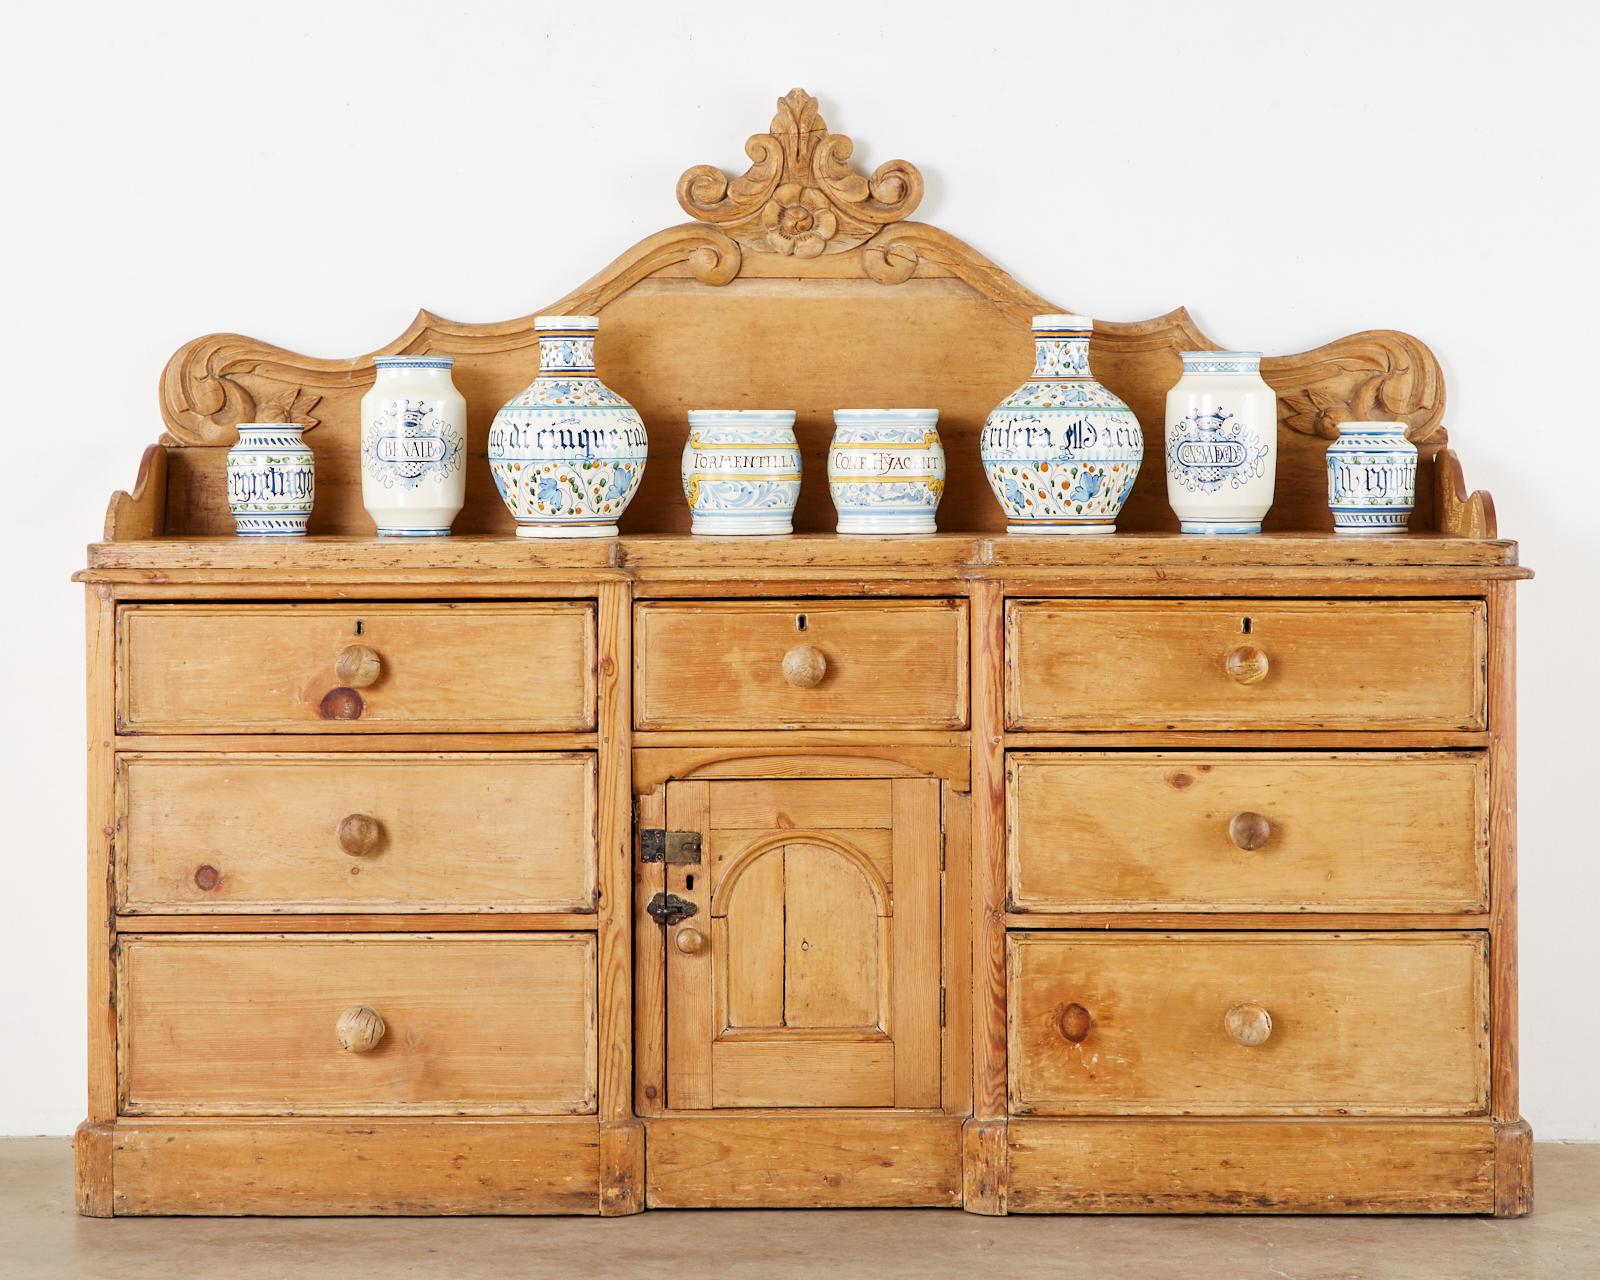 Rustic 19th century English country sideboard server or buffet constructed from aged thick pine. Features galleried sides and a grand peaked backboard embellished with scrolled acanthus decoration and a center floral spray. The case is topped with a